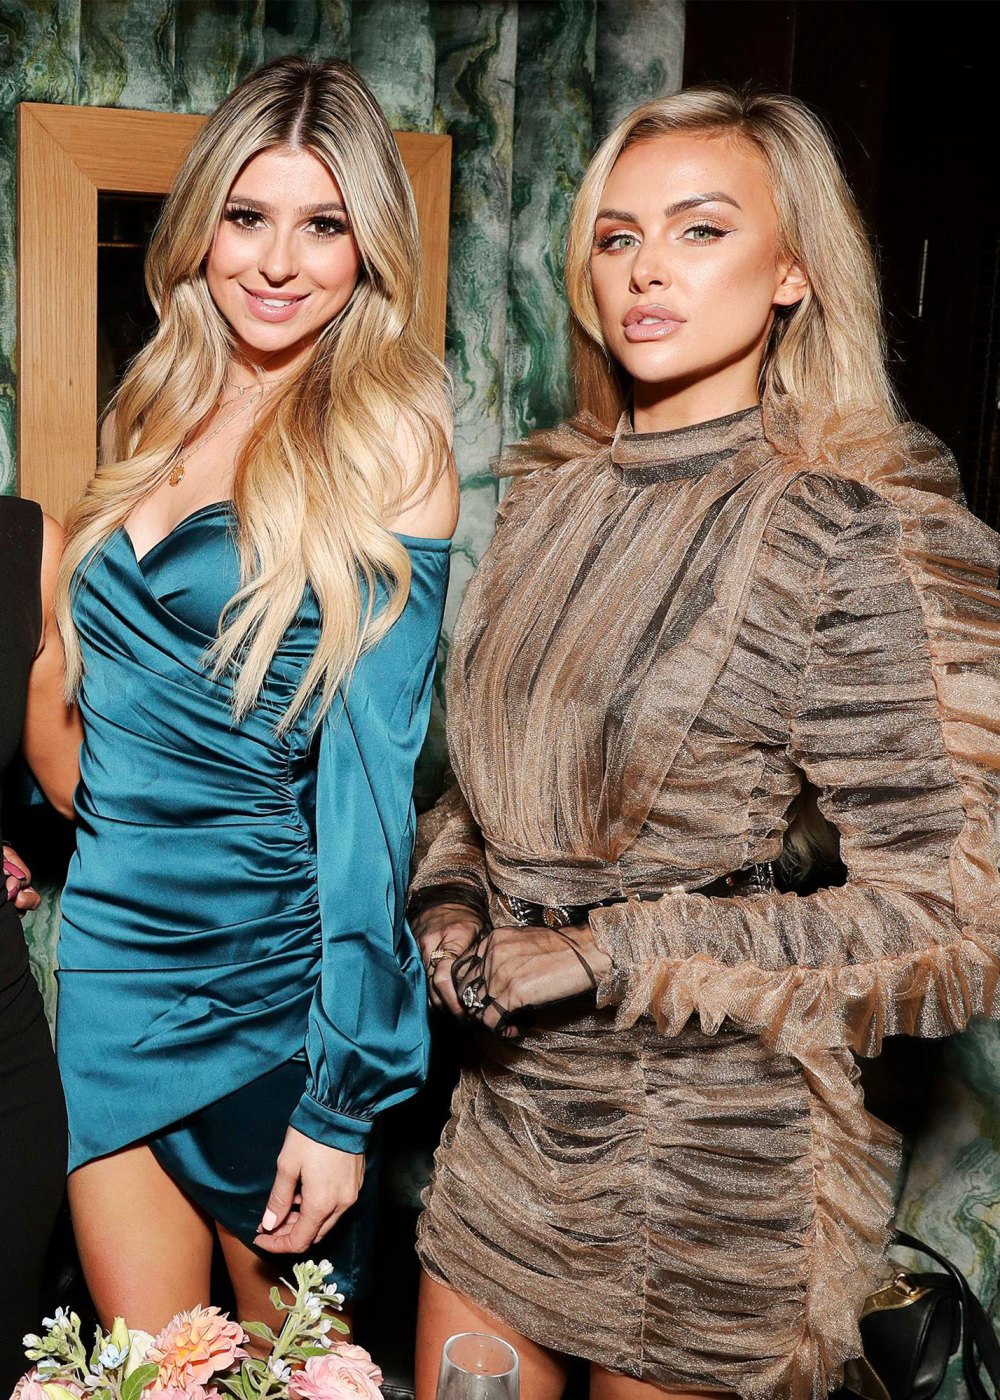 ‘Vanderpump Rules’ Costars Lala Kent and Raquel Leviss’ Ups and Downs  - 890 MTV's 'The Hills: New Beginnings' TV Show party, Inside, Liaison Restaurant and Lounge, Los Angeles, USA - 19 Jun 2019